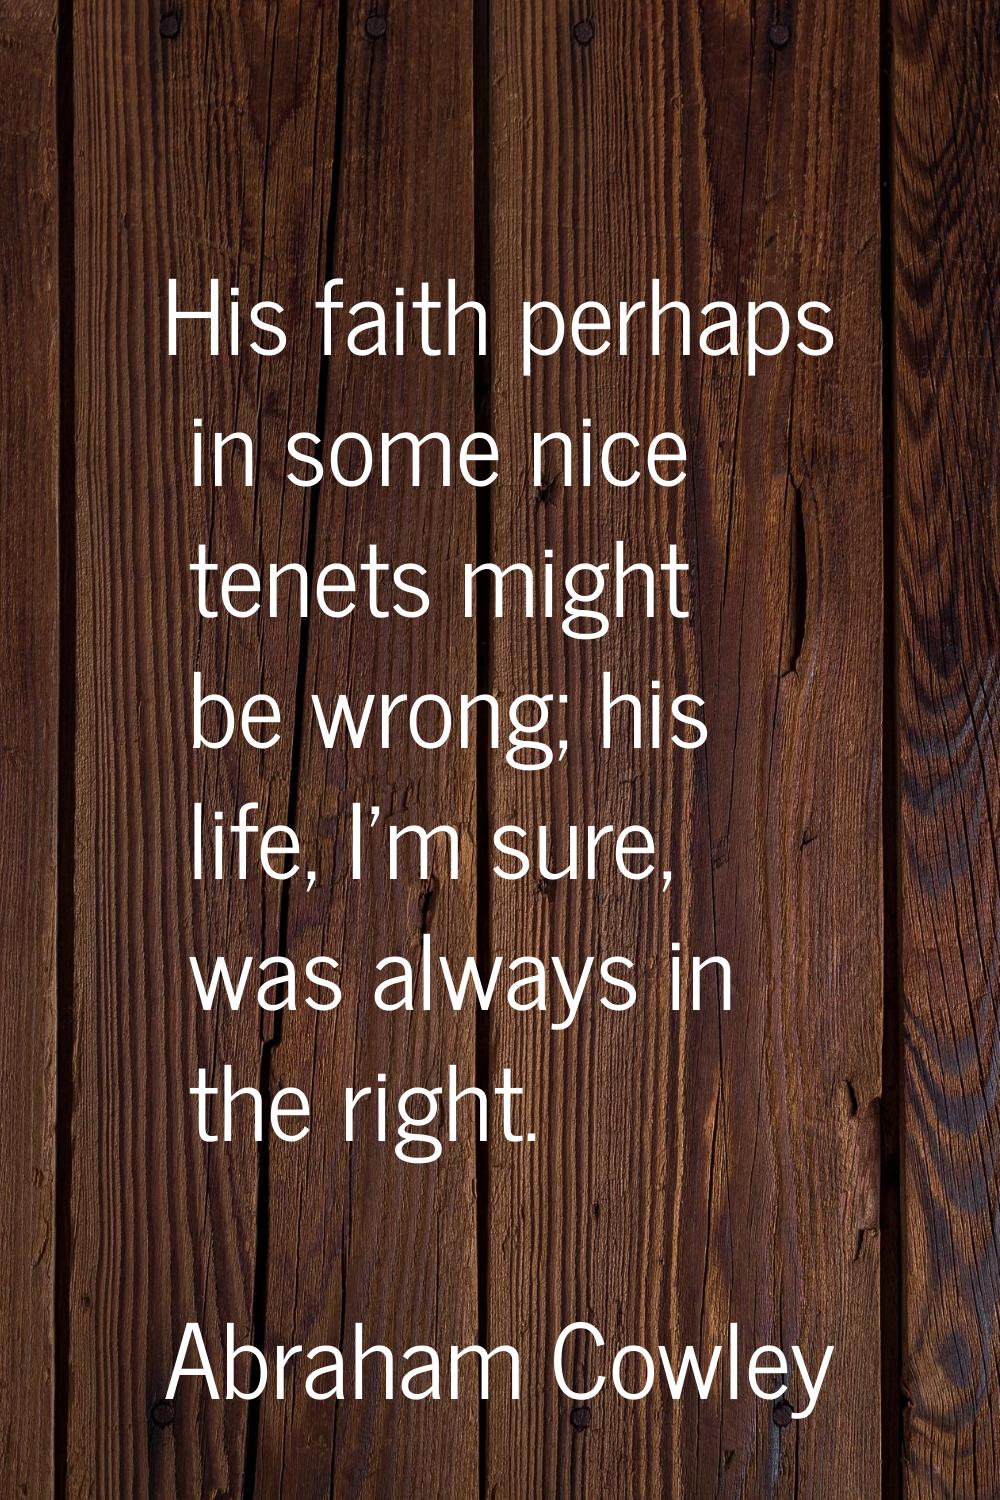 His faith perhaps in some nice tenets might be wrong; his life, I'm sure, was always in the right.